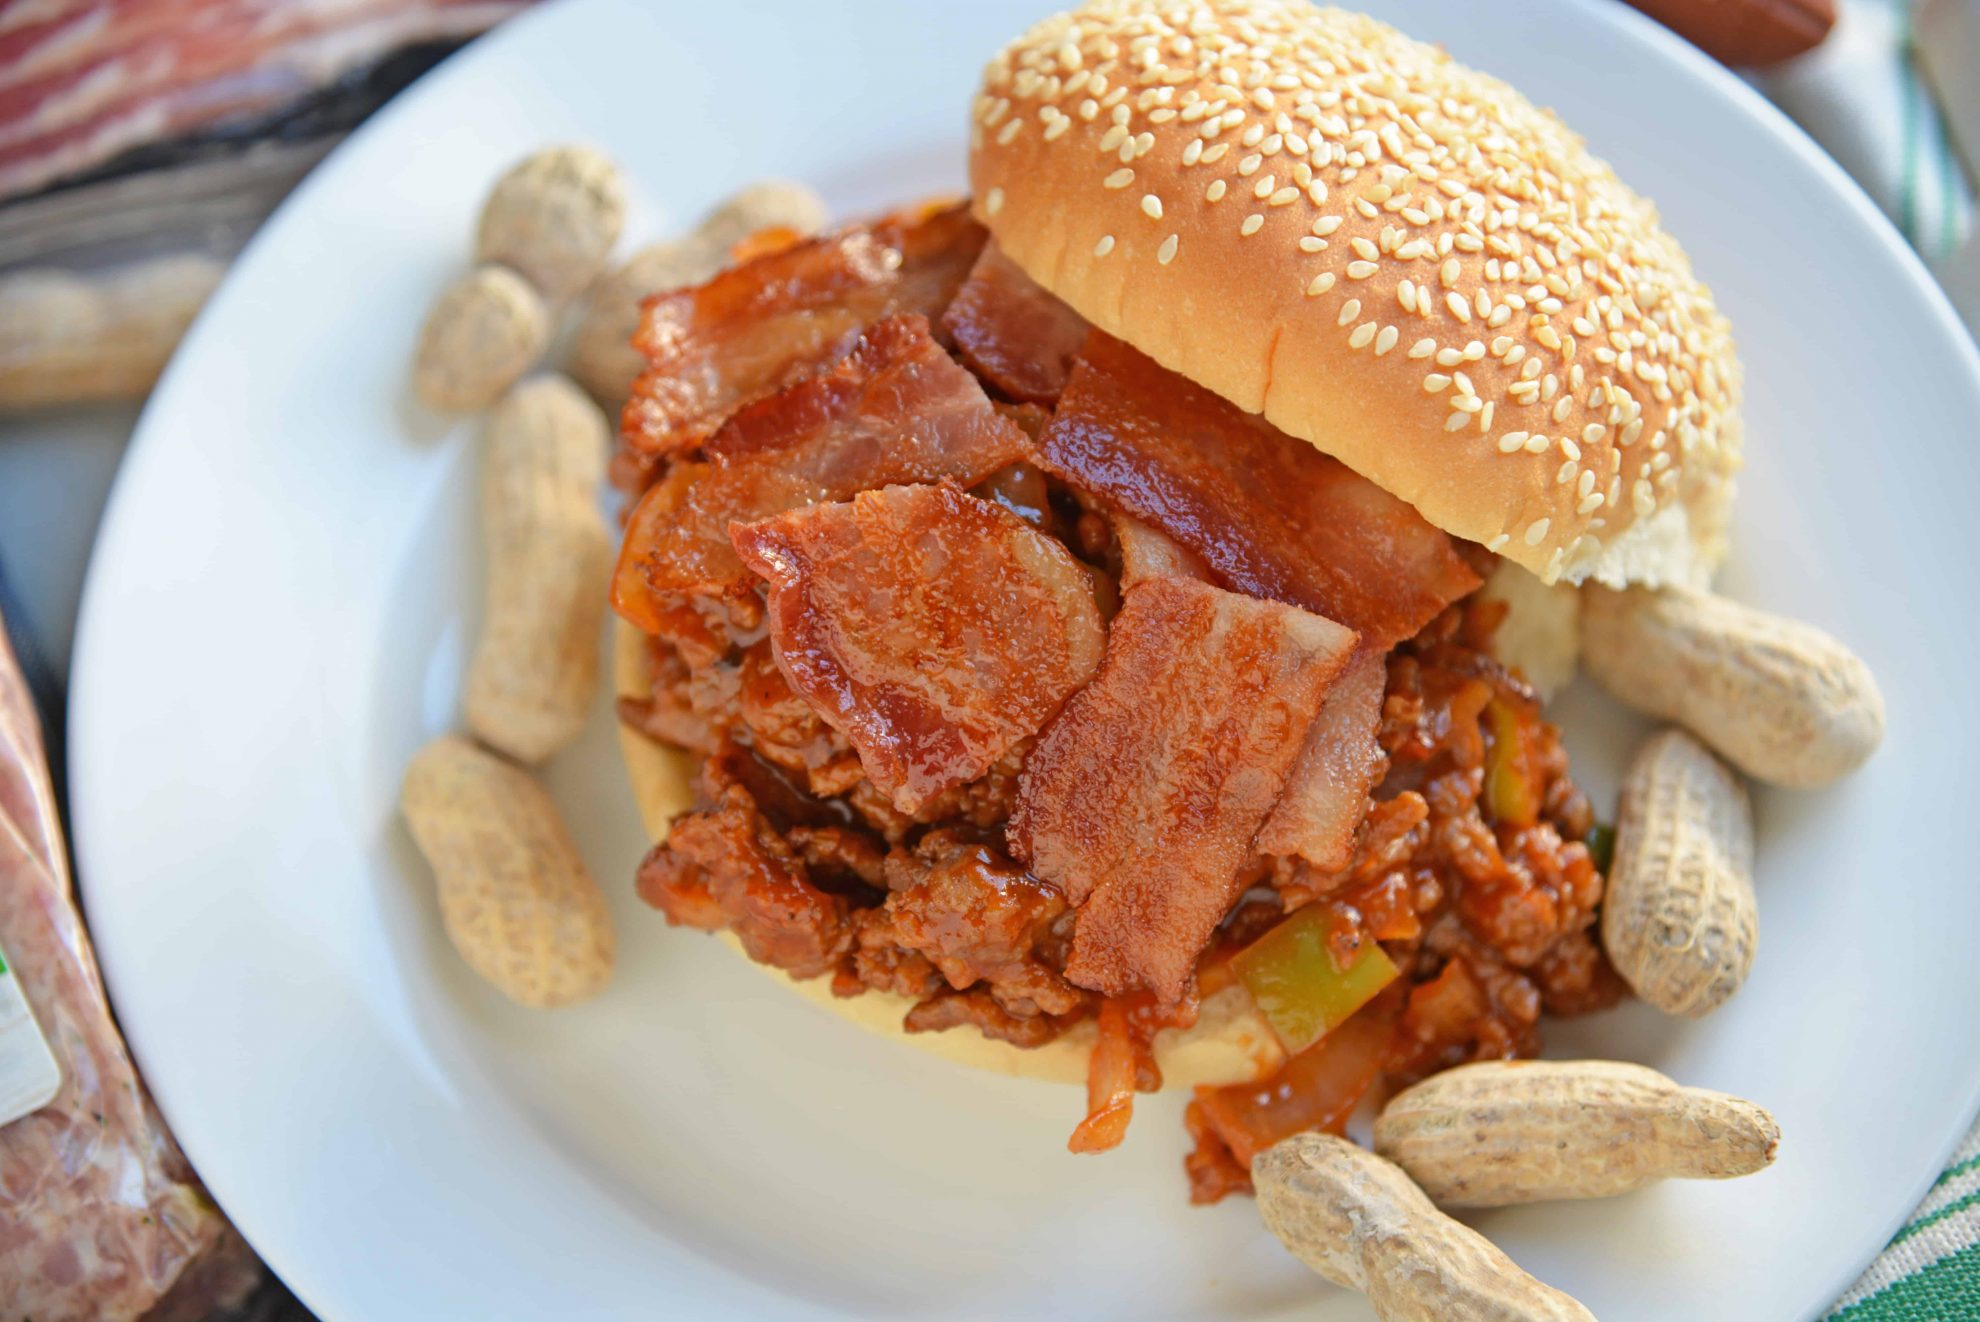 Homemade Sloppy Joes are so easy to make! Use my special sweet heat sloppy Joe sauce recipe with ground pork, beef, chicken or even turkey! #homemadesloppyjoes #sloppyjoesauce #sloppyjoerecipe www.savoryexperiments.com 